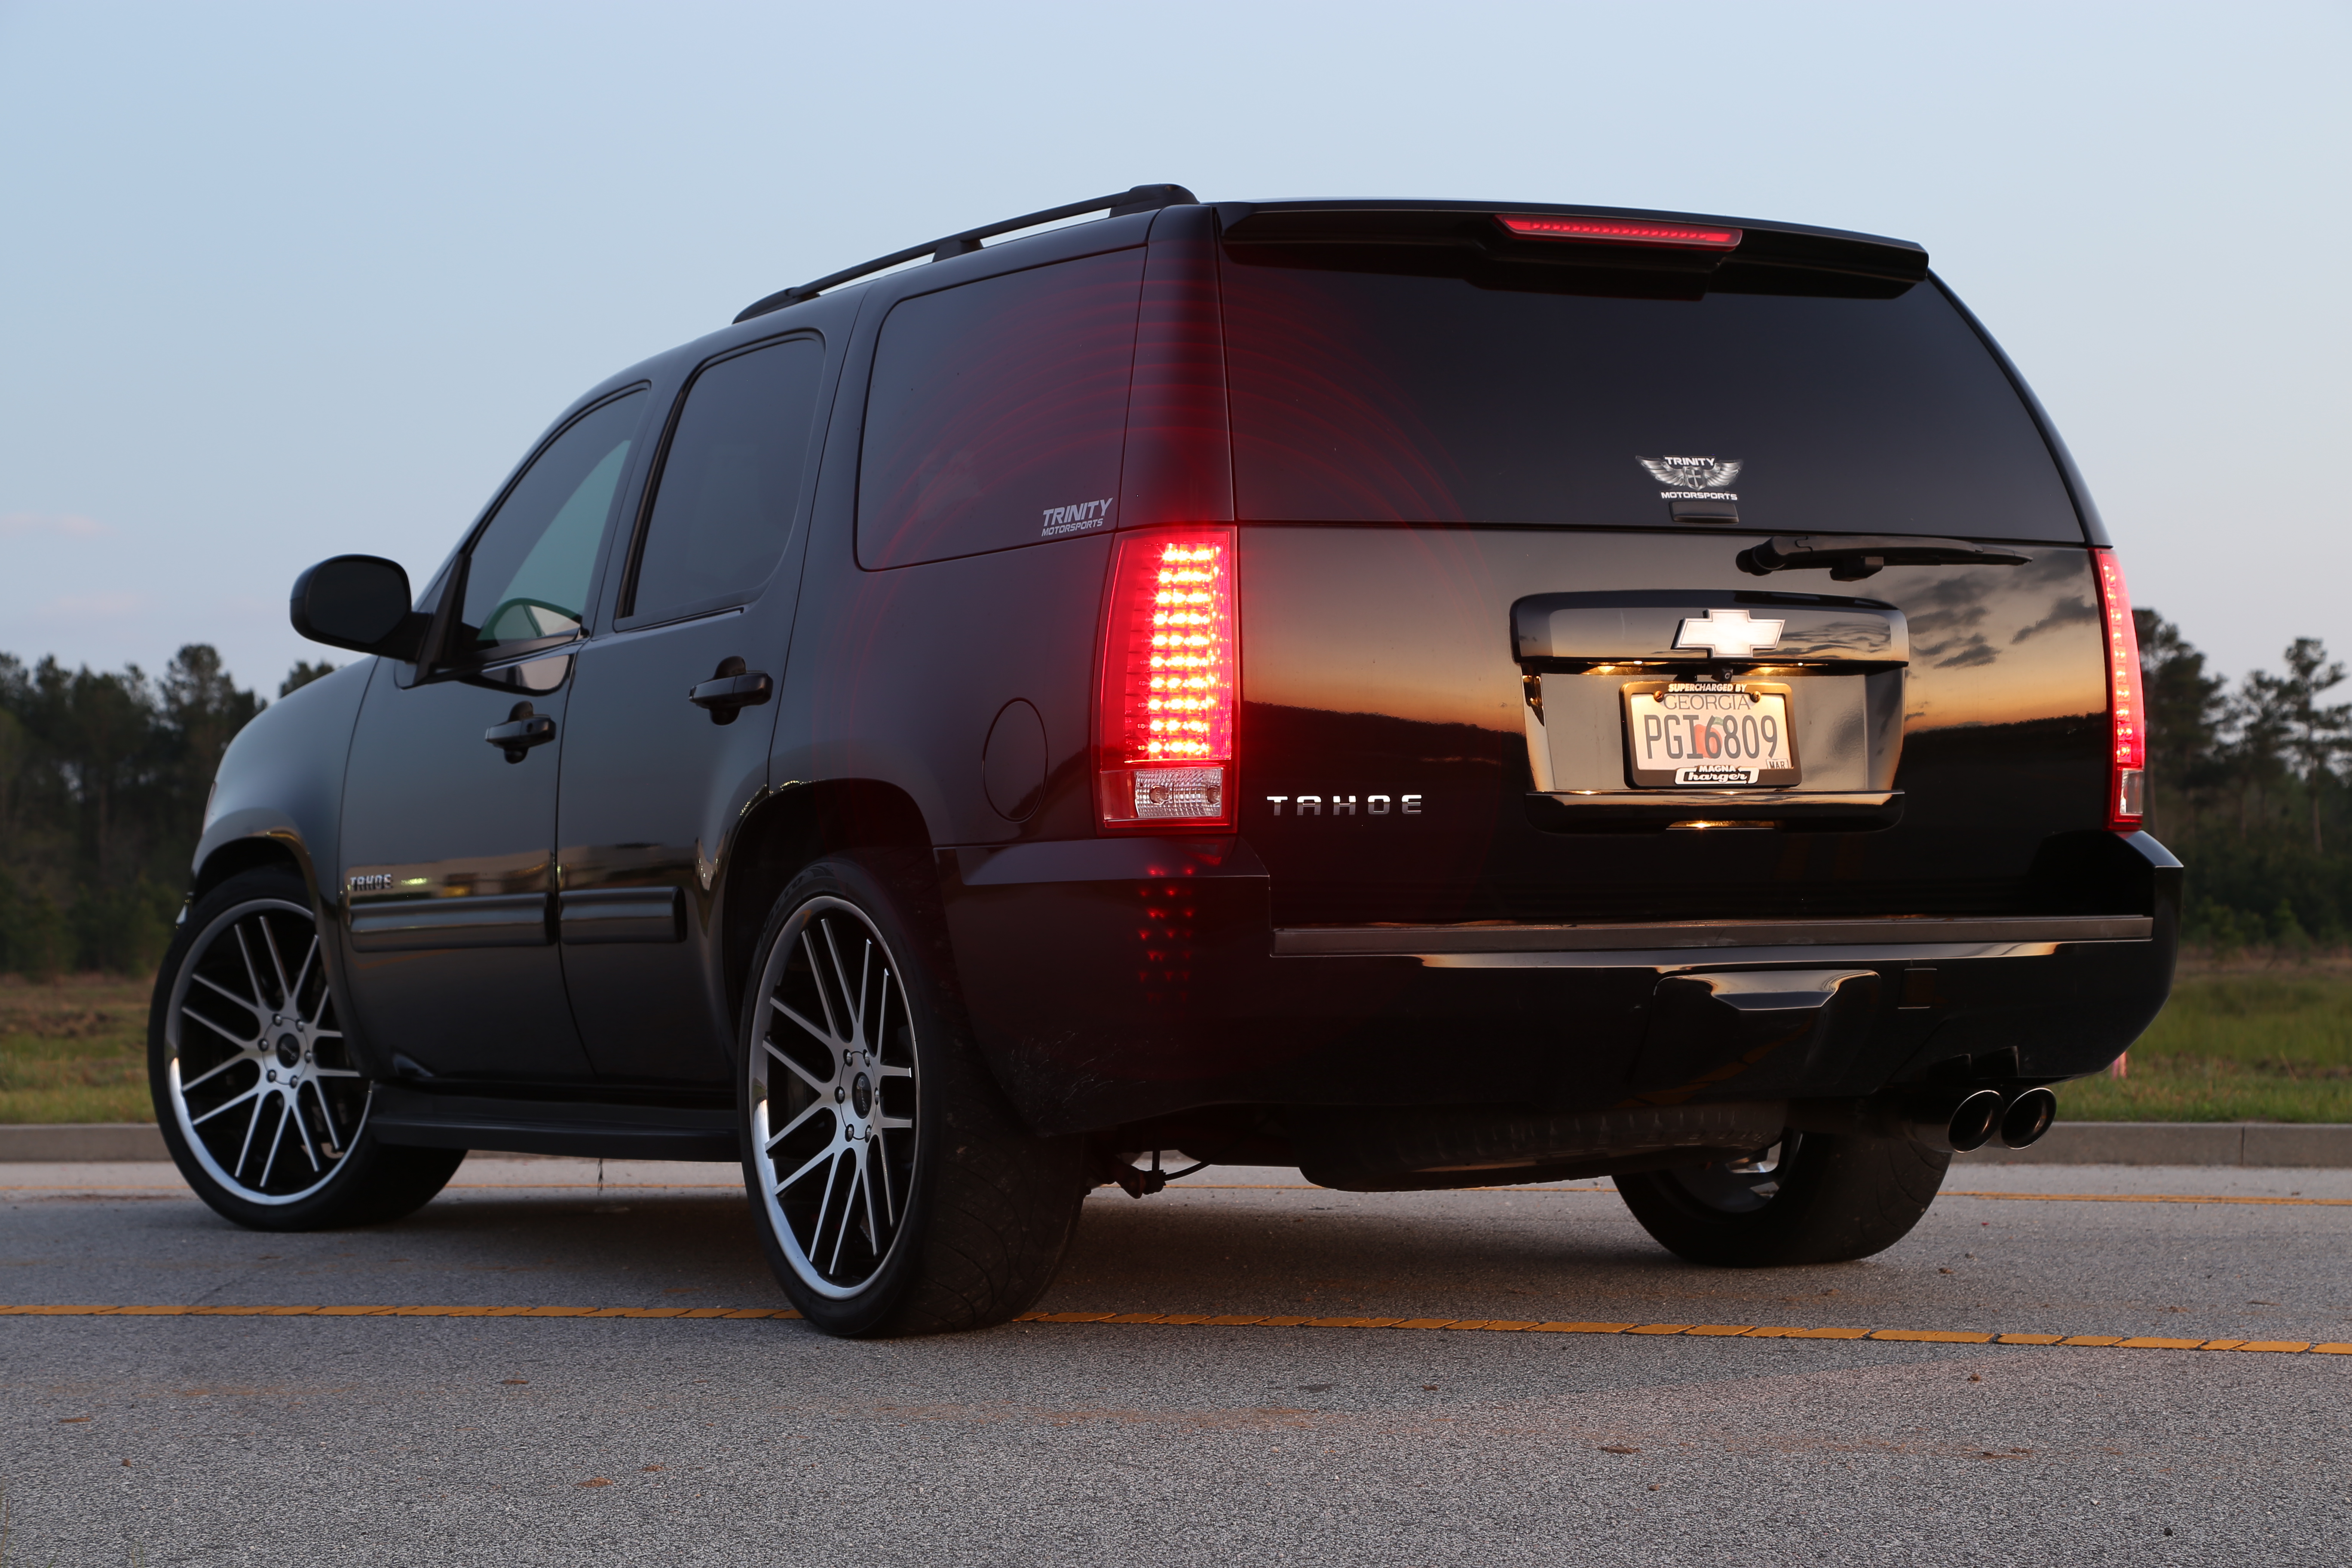 A family SUV doesn’t have to be boring, as this 2010 Chevy Tahoe clearly de...